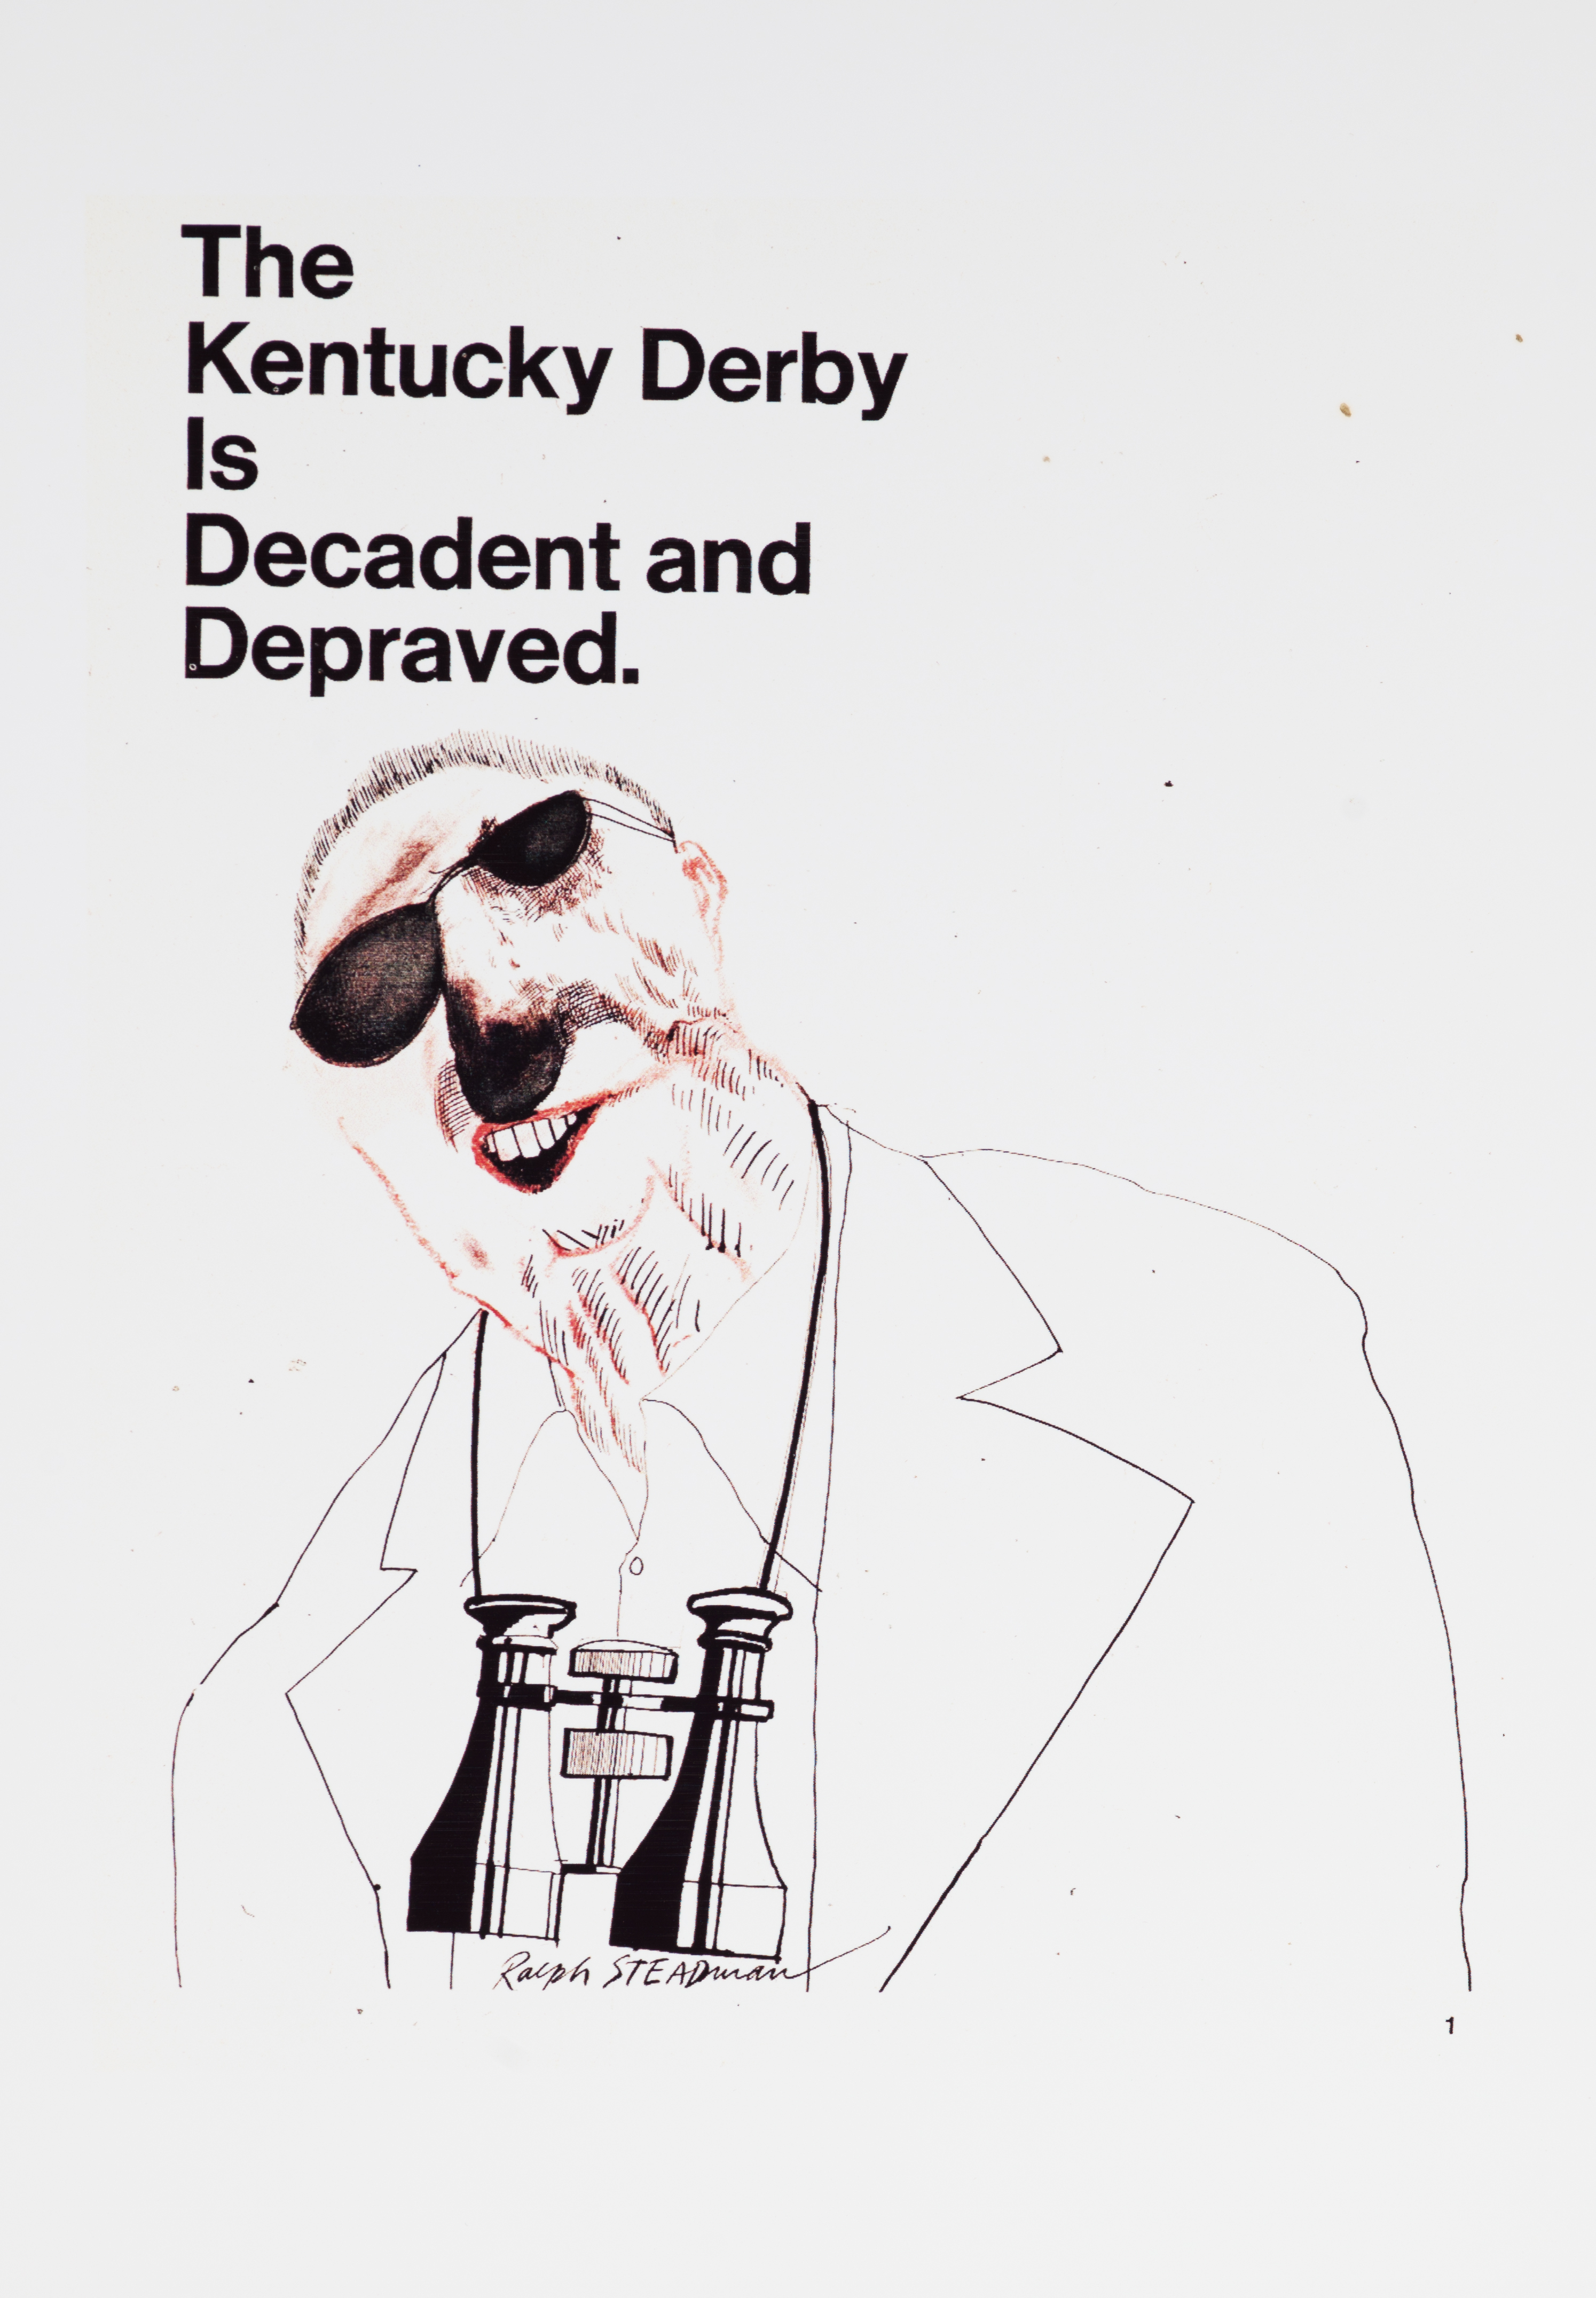 Cover of Scanlan's Magazine which contains the feature The Kentucky Derby is Decadent and Depraved.by Hunter S Thompson, Illustrated by Ralph Steadman